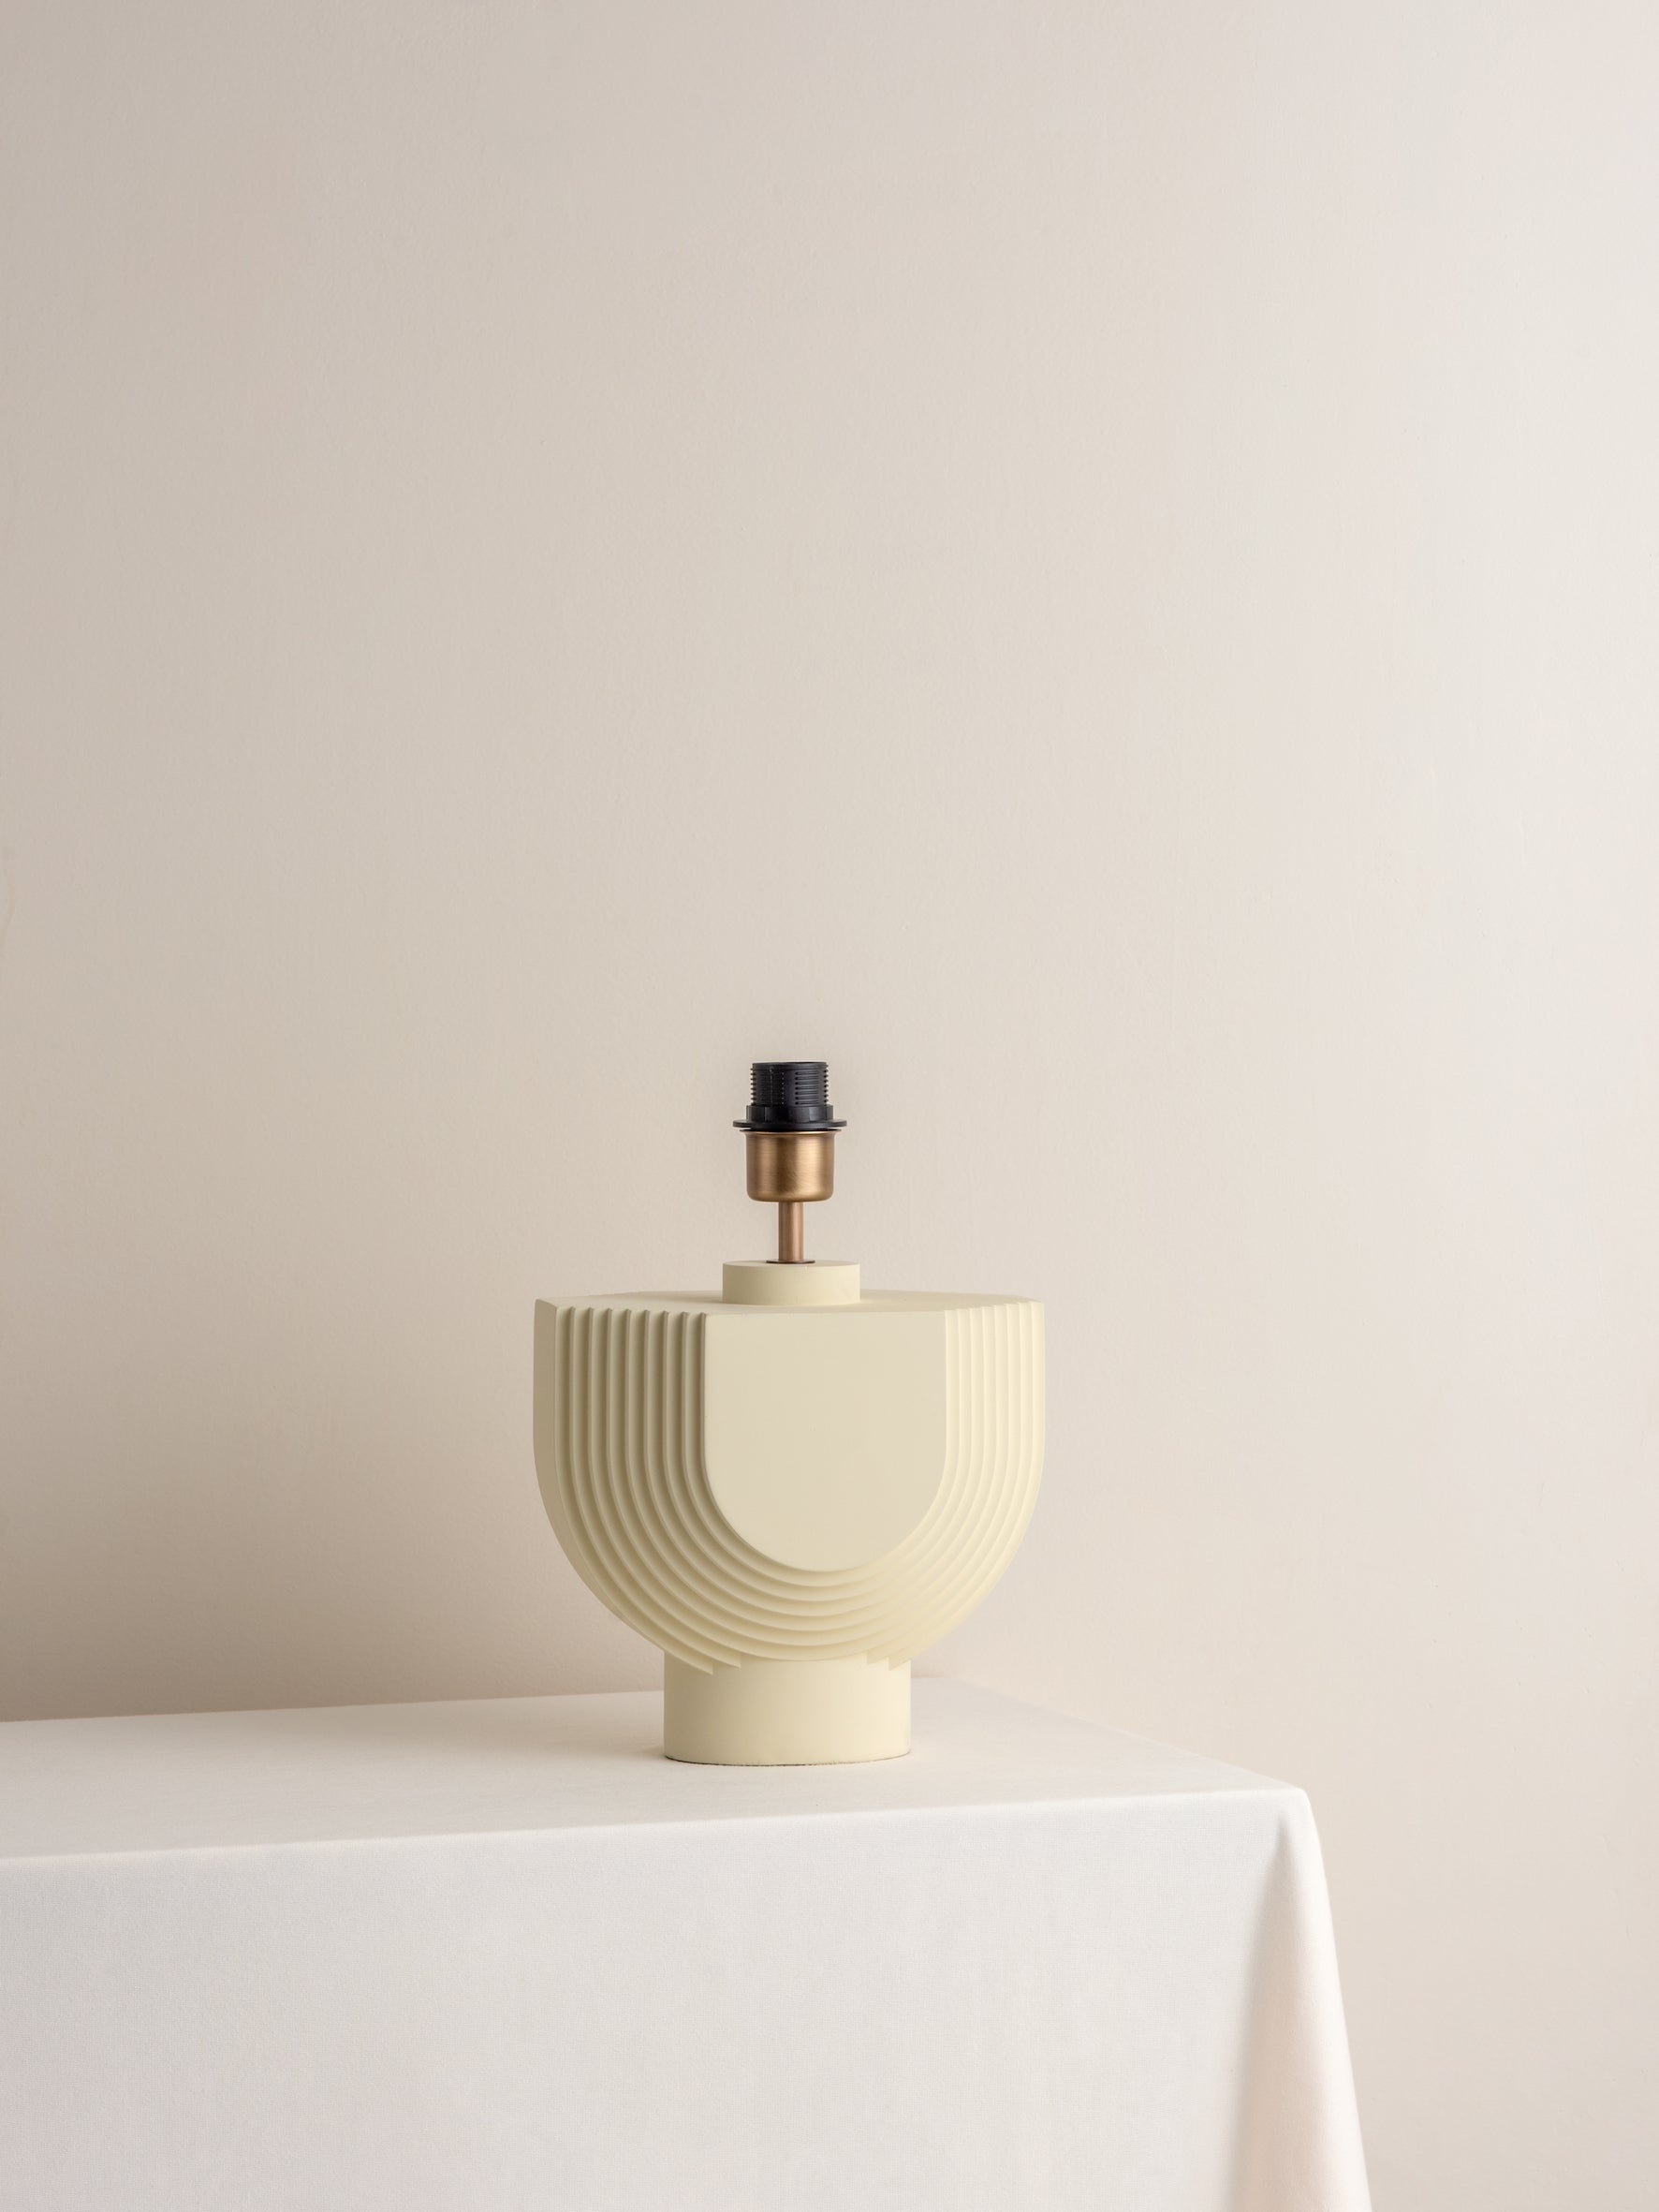 Editions concrete lamp with + green lacquer shade | Table Lamp | Lights & Lamps | UK | Modern Affordable Designer Lighting